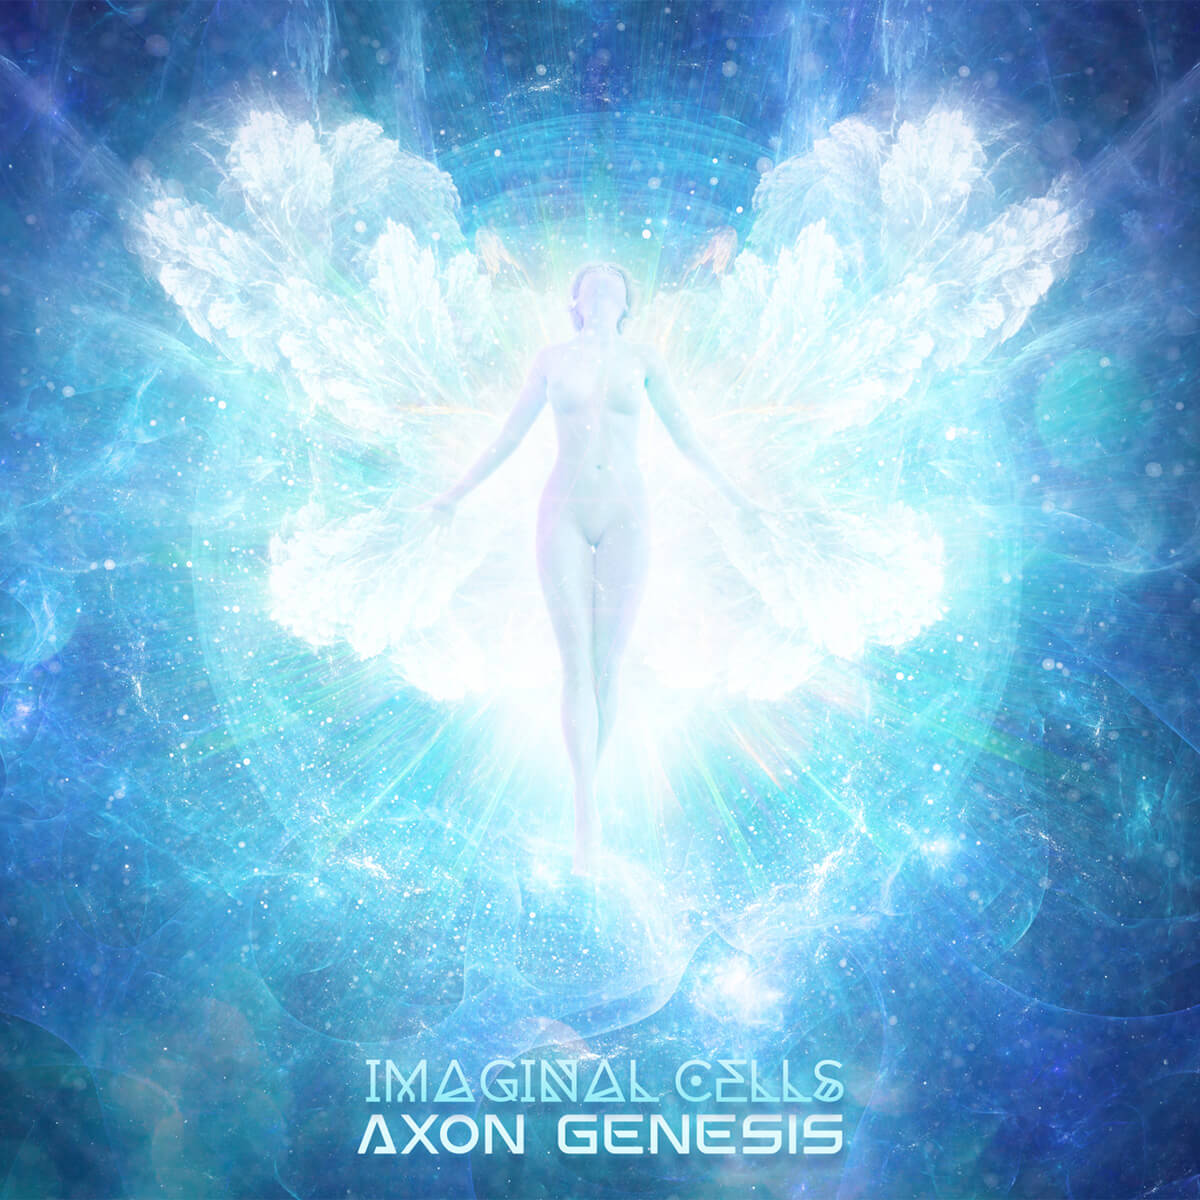 Imaginal Cells Music and Cover Art by Axon Genesis